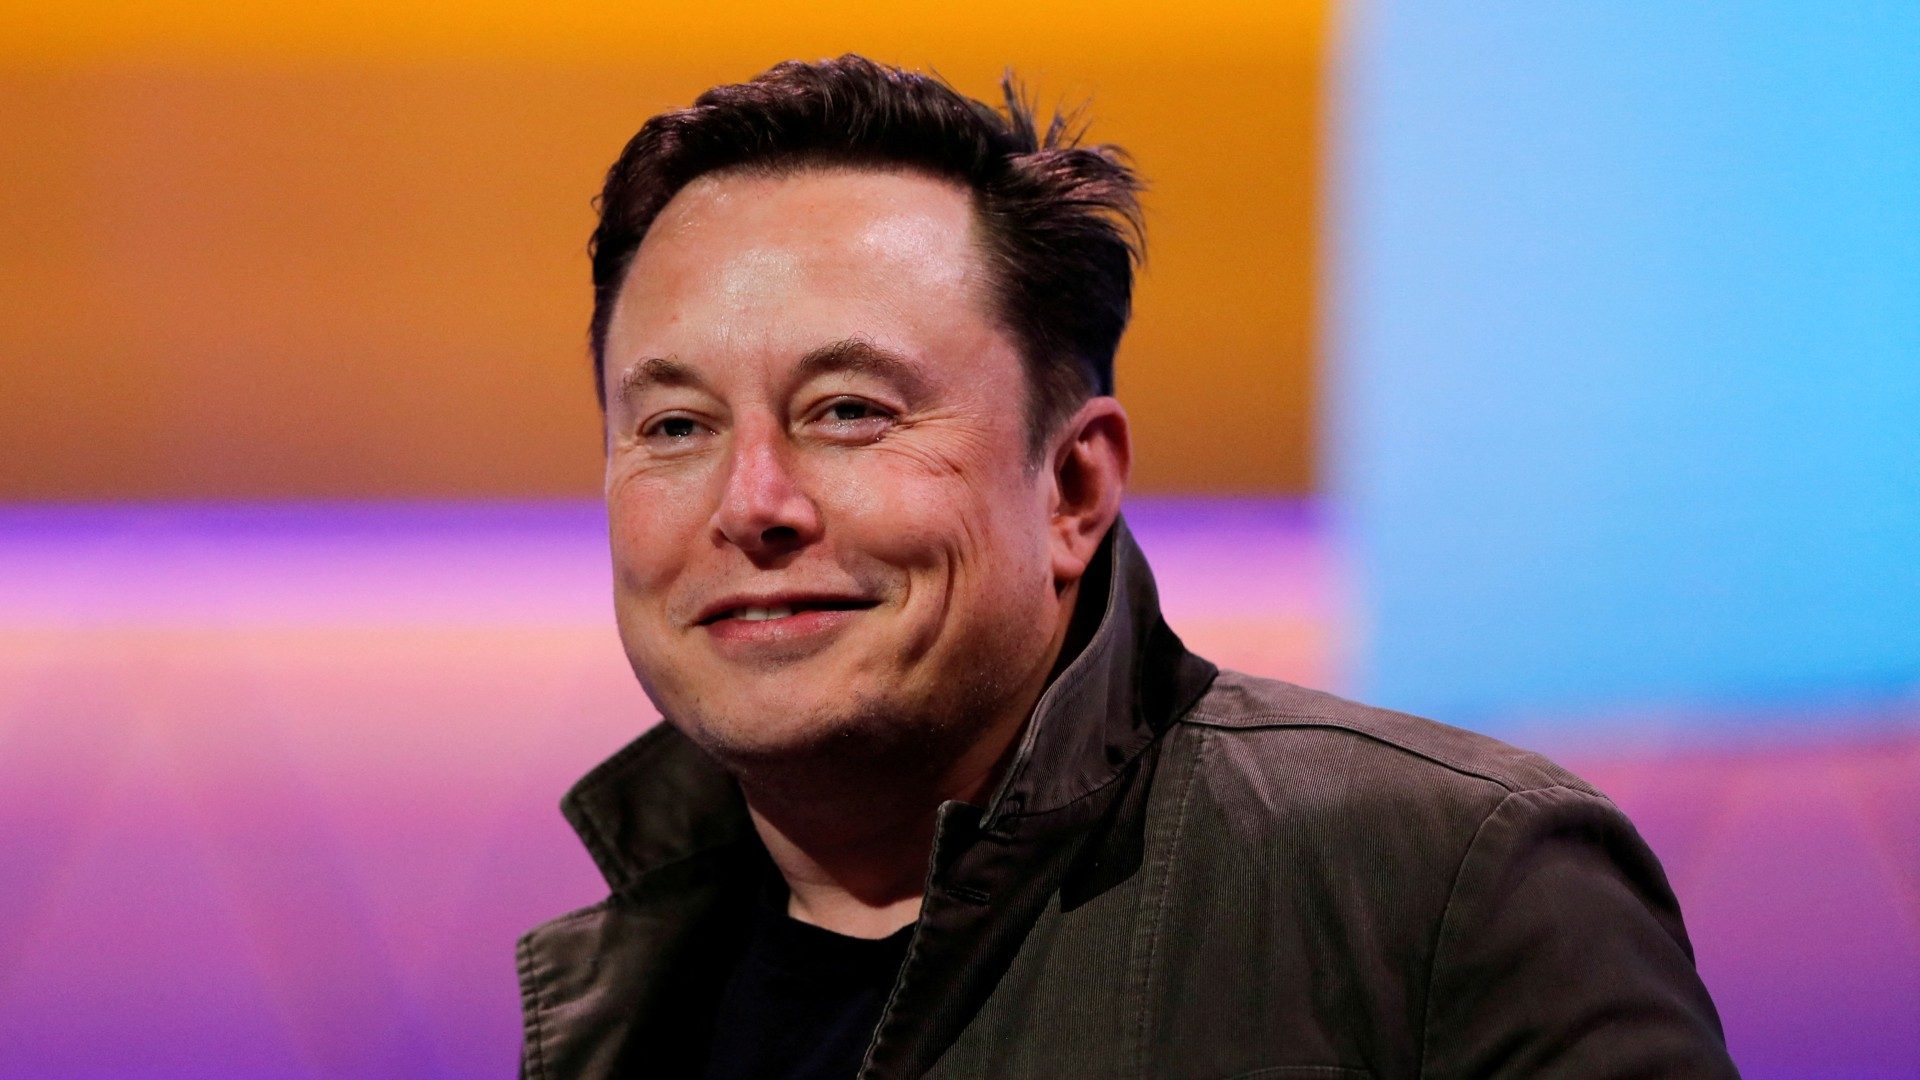 Neuralink’s ‘show & tell’ delayed by one month, Elon Musk says